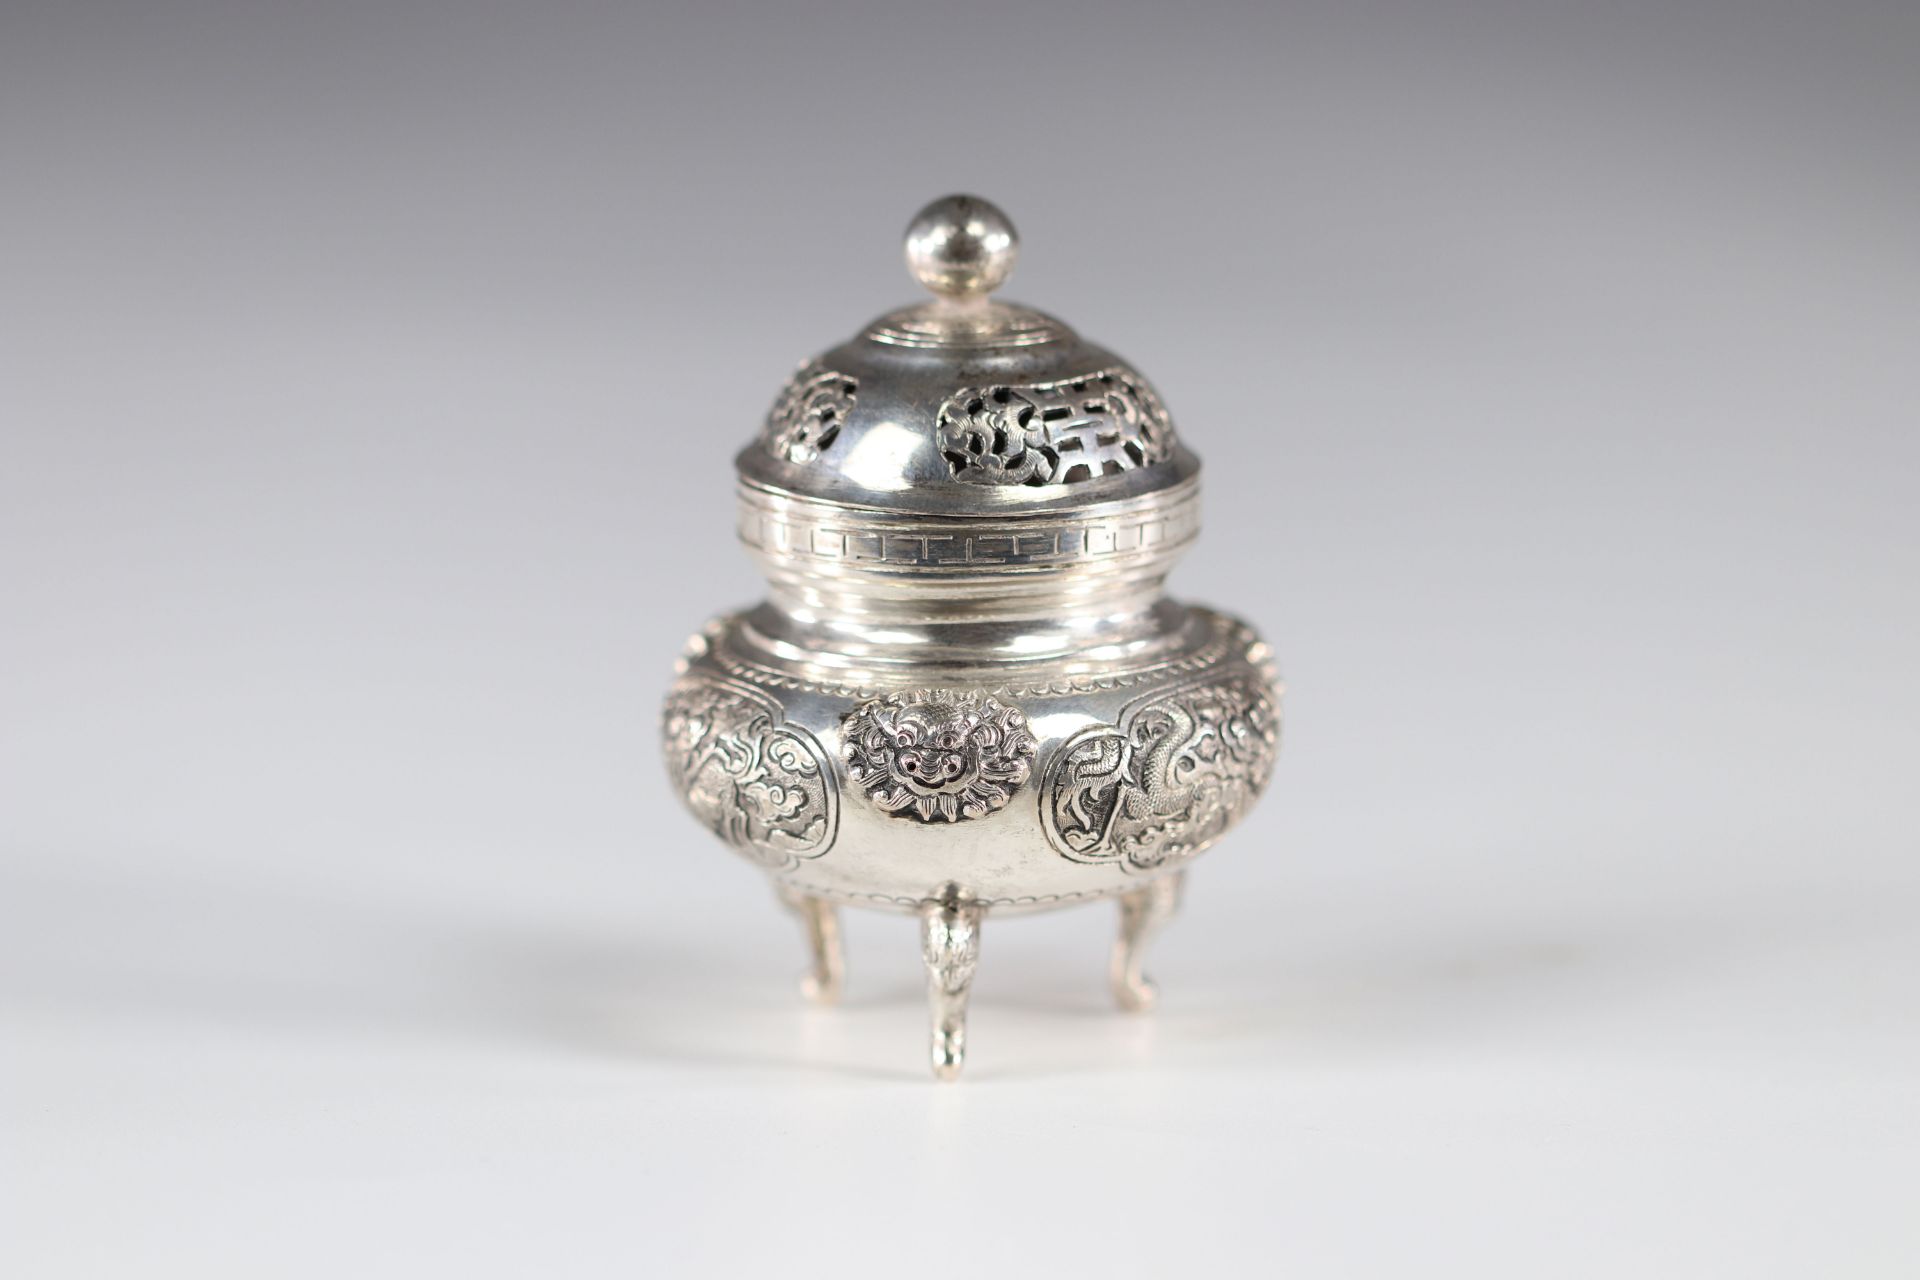 China set of silver objects teapot and pots - Image 7 of 12